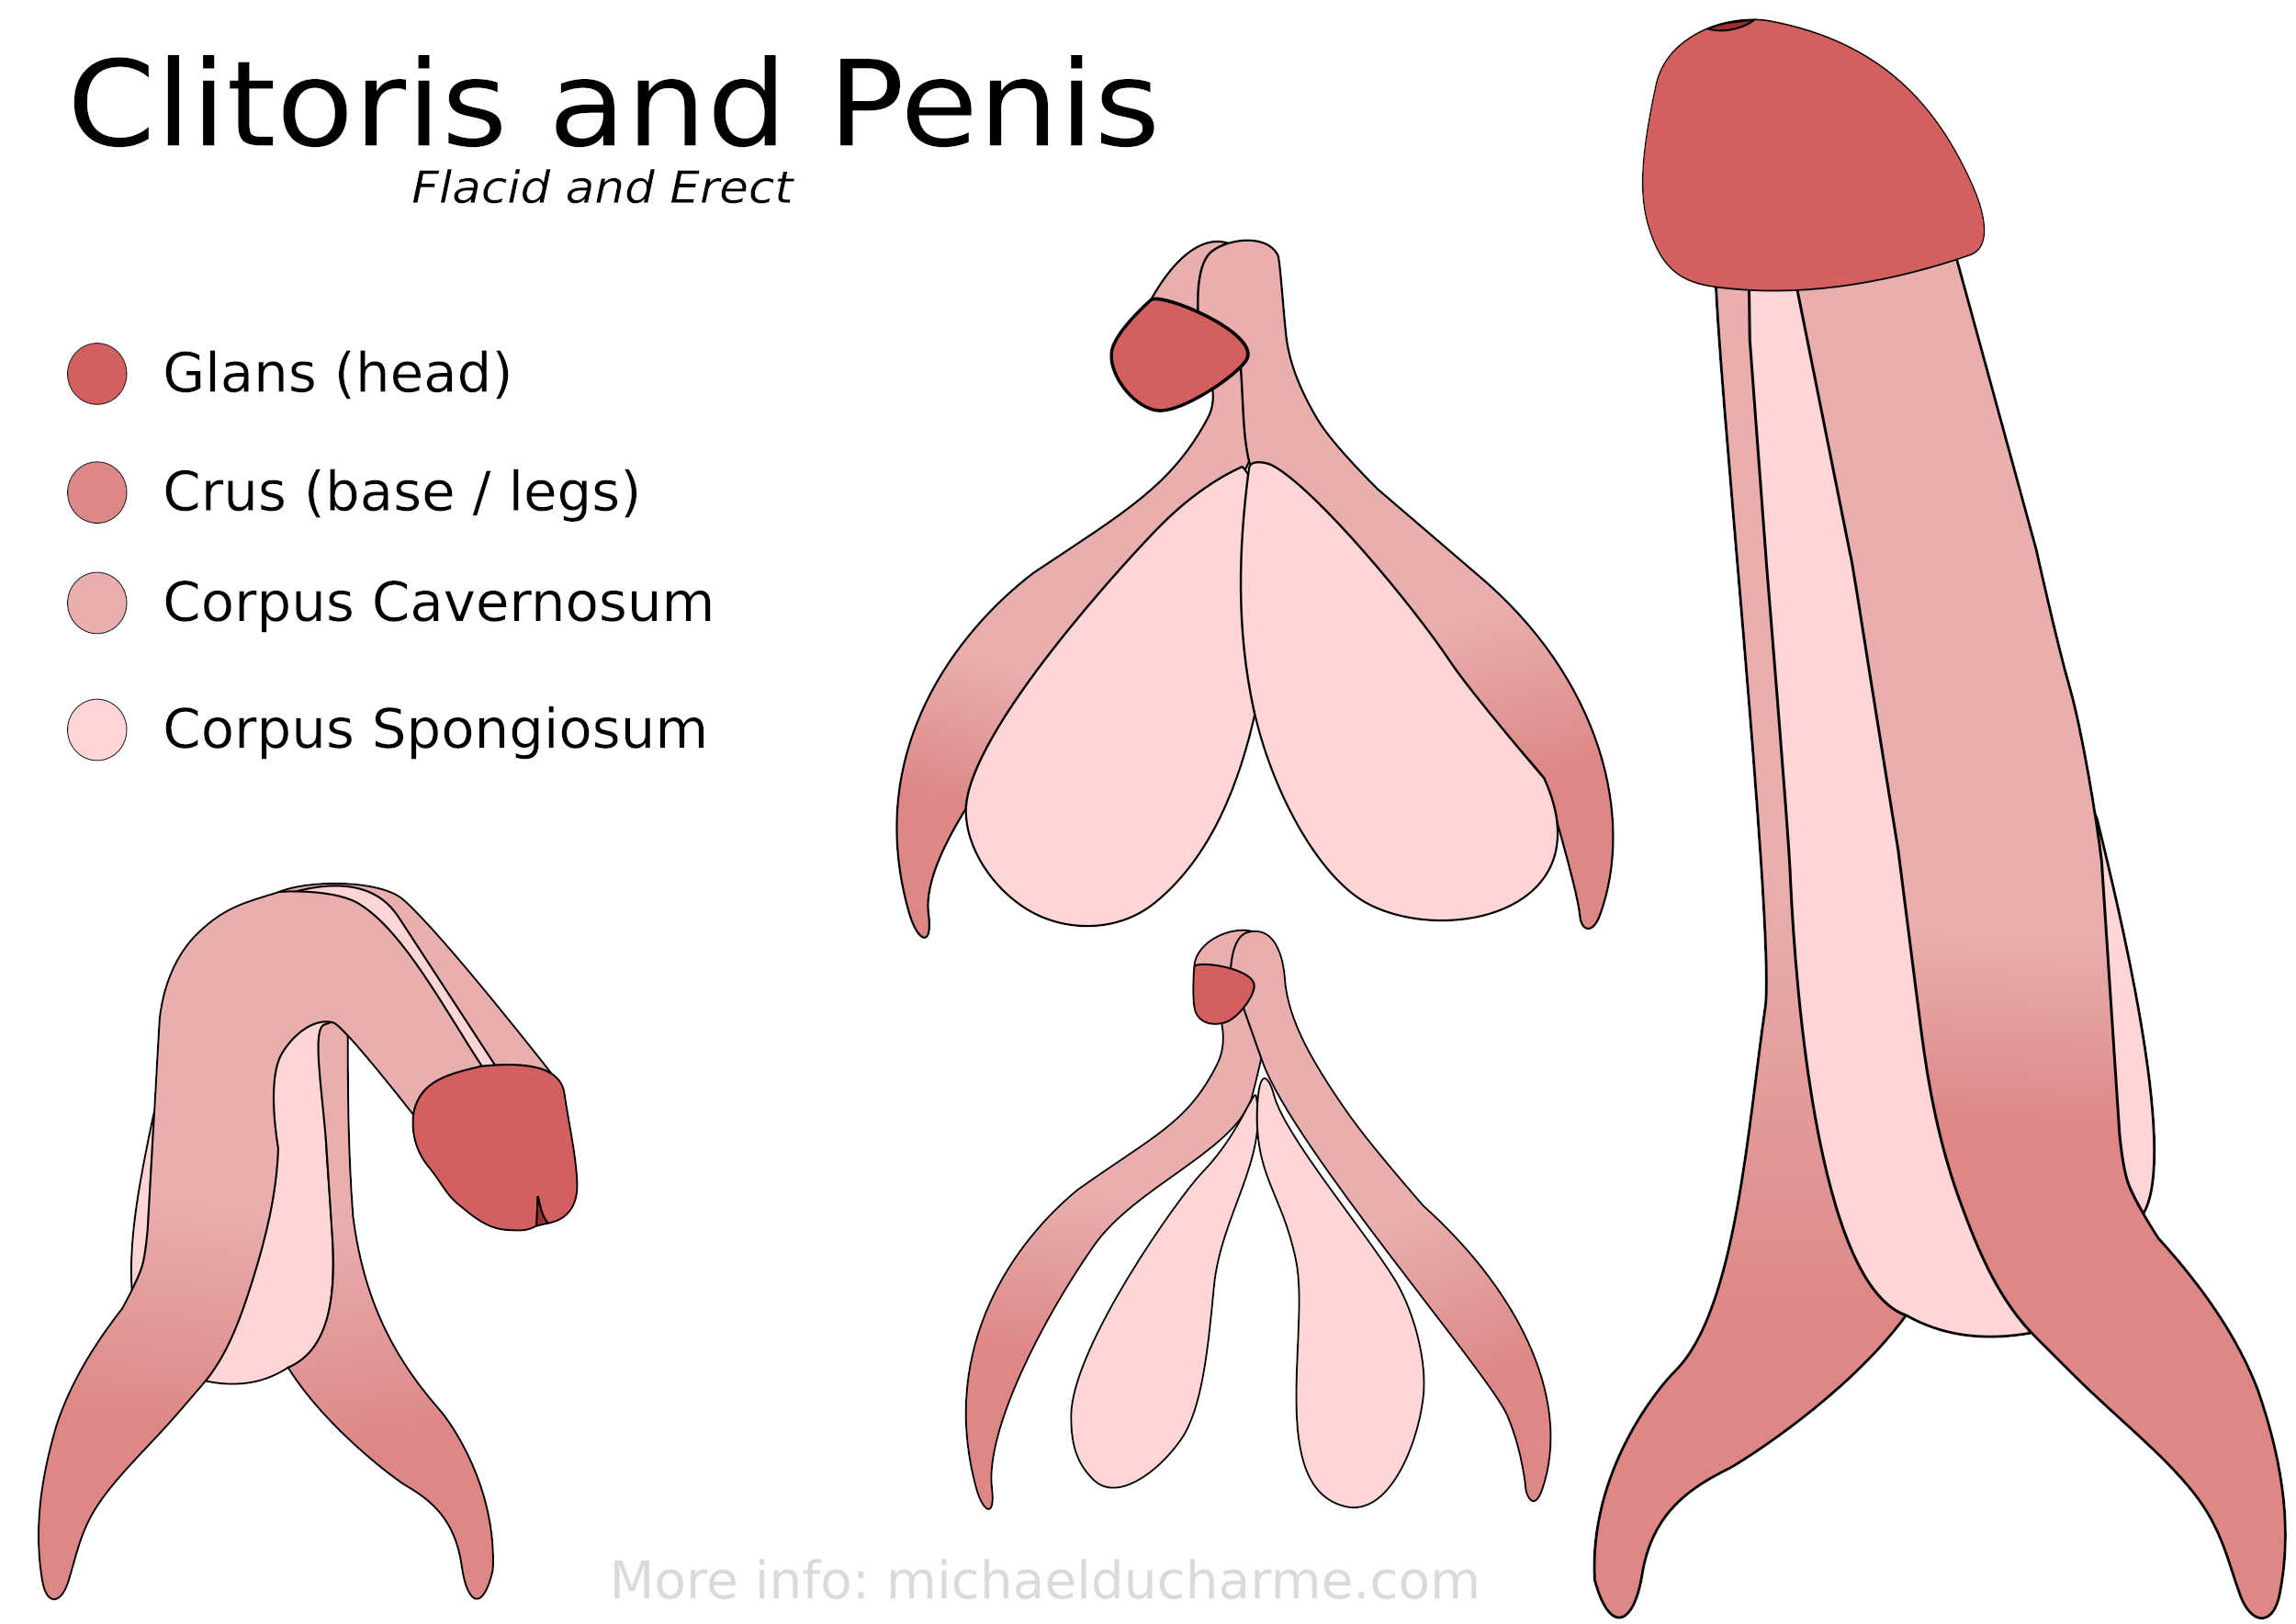 Clitoris and Penis drawing by Michael Ducharme